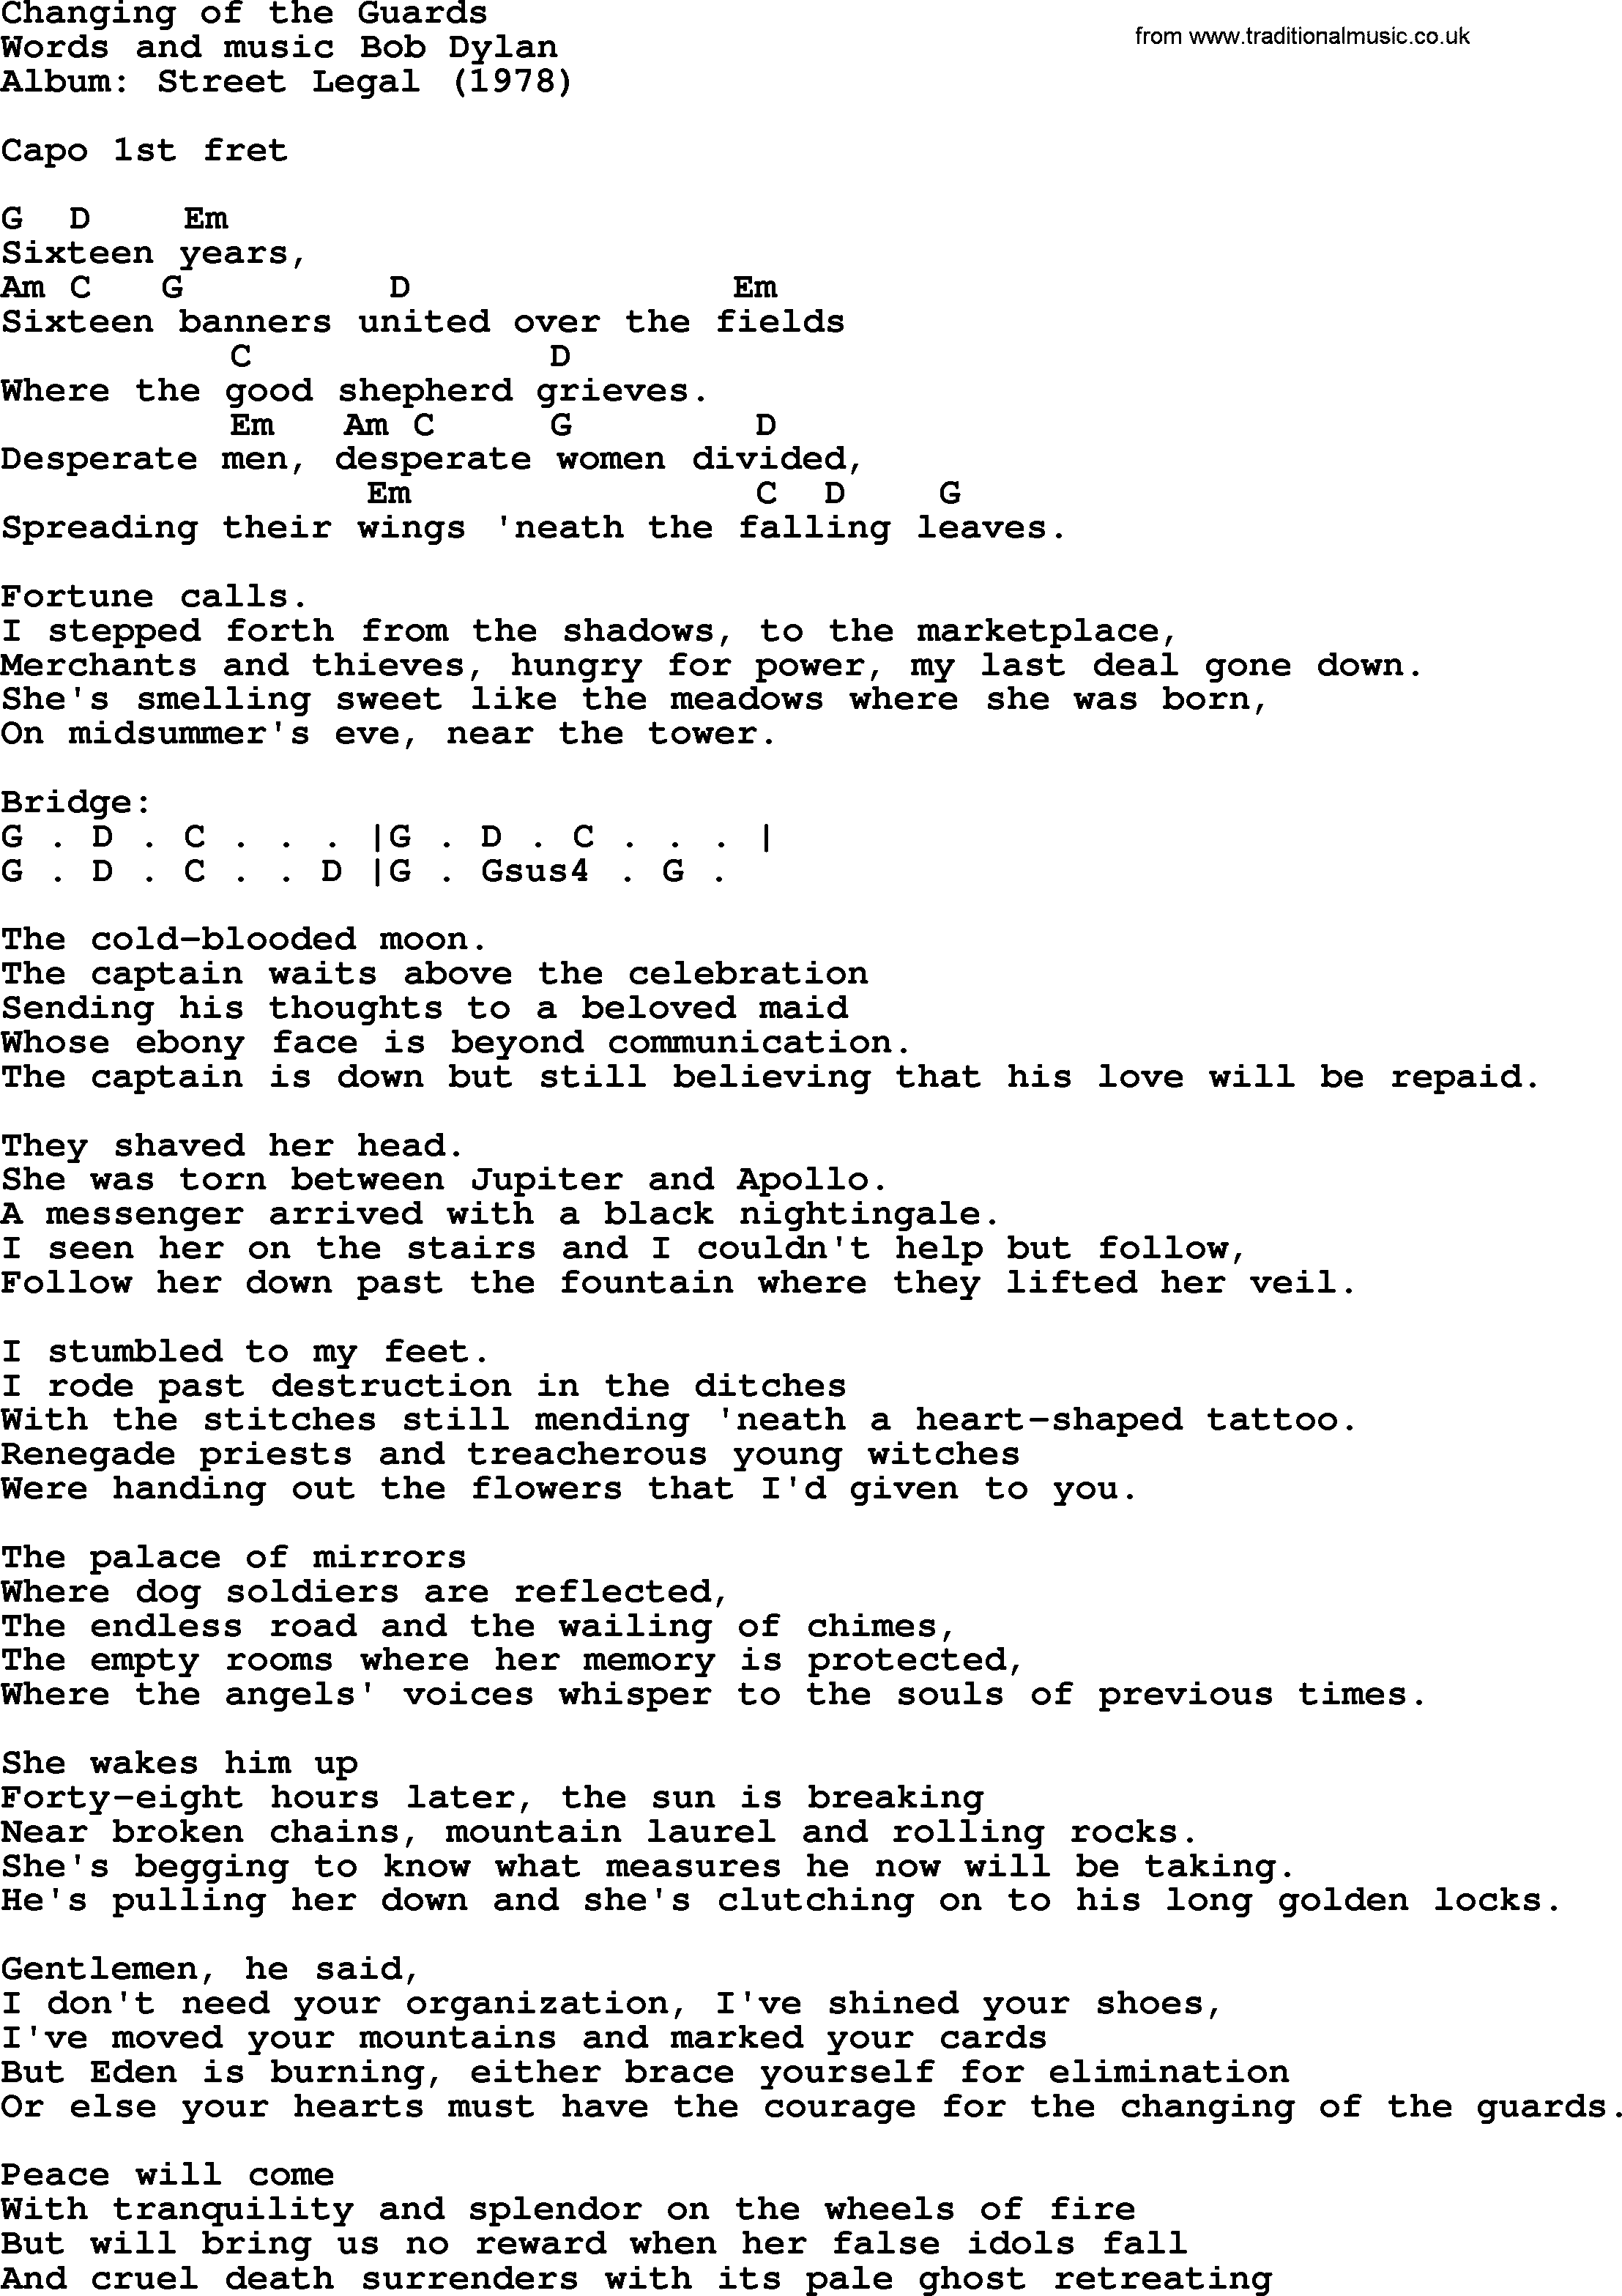 Bob Dylan song, lyrics with chords - Changing of the Guards